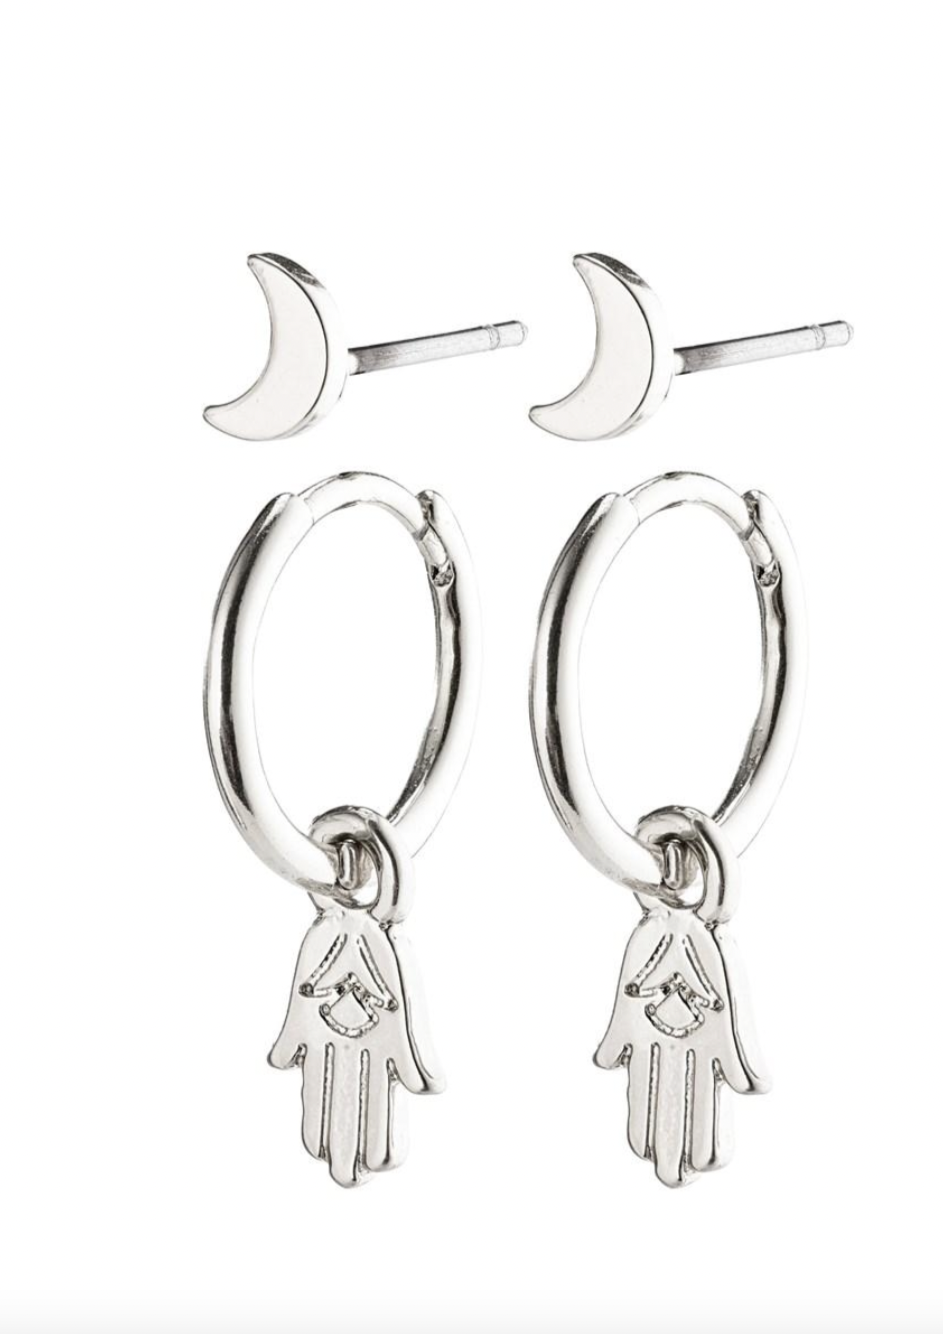 Experience the nomadic lifestyle through exciting cultures, new experiences, and beautiful landscapes. The, silver-plated, earrings reflect all this with the moon-shaped studs, bohemian-style hoops and the Hand of Fatima pendant. Create a sense of magic that is especially effective when items are worn together.